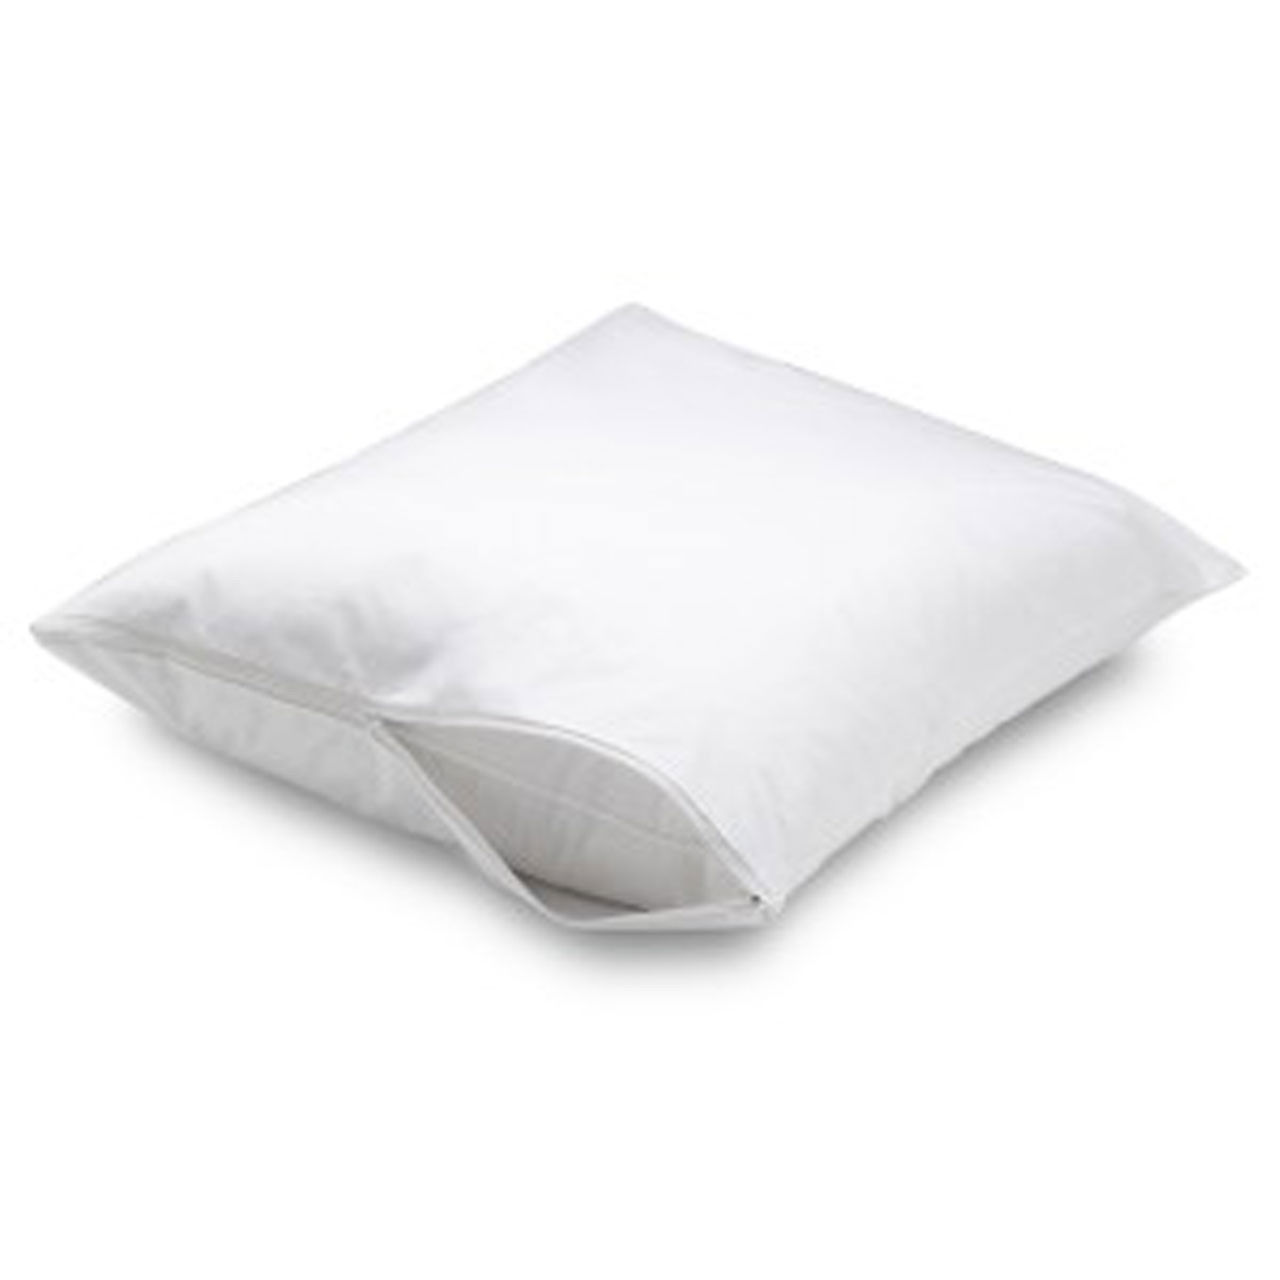 Woven Zippered Pillow Protectors Questions & Answers